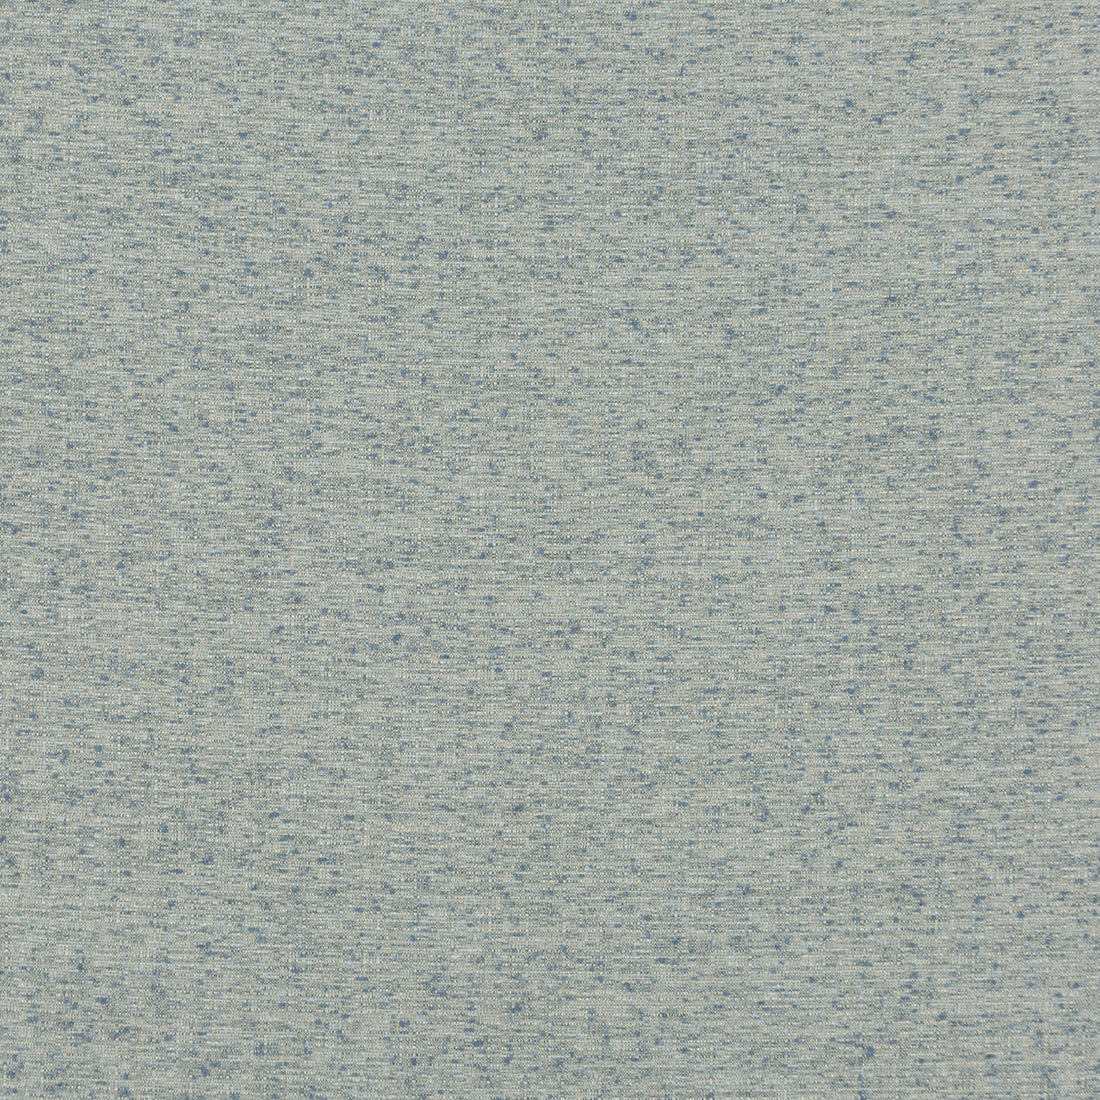 Drift fabric in delft color - pattern BF10678.625.0 - by G P &amp; J Baker in the Essential Colours collection